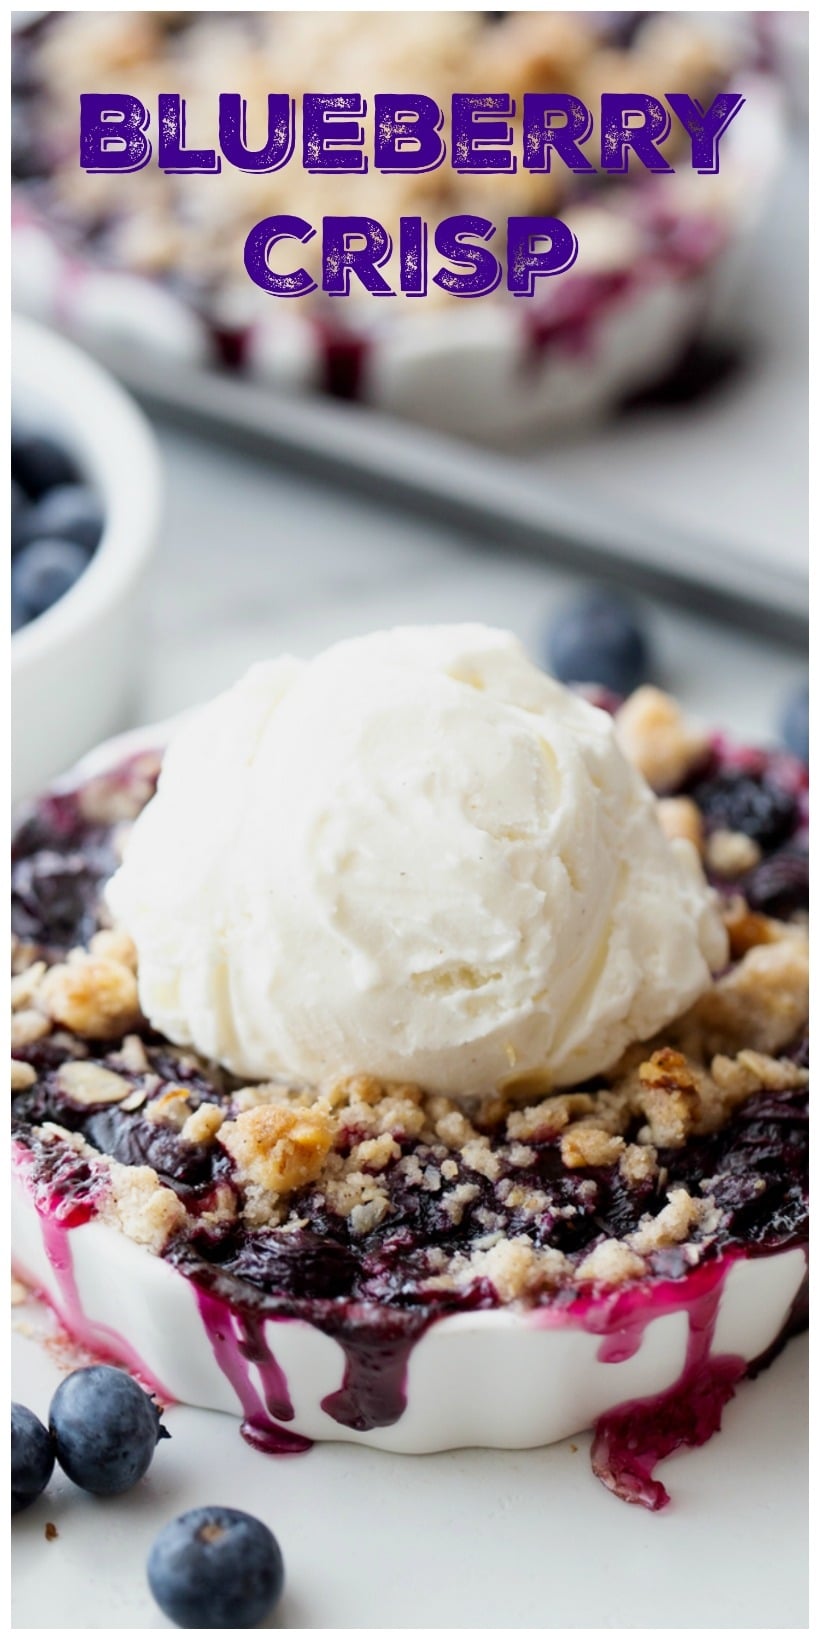 Blueberry Crisp, a quick and easy dessert recipe with an irresistible, crumbly oat topping and sweet, syrupy blueberries. via @cmpollak1